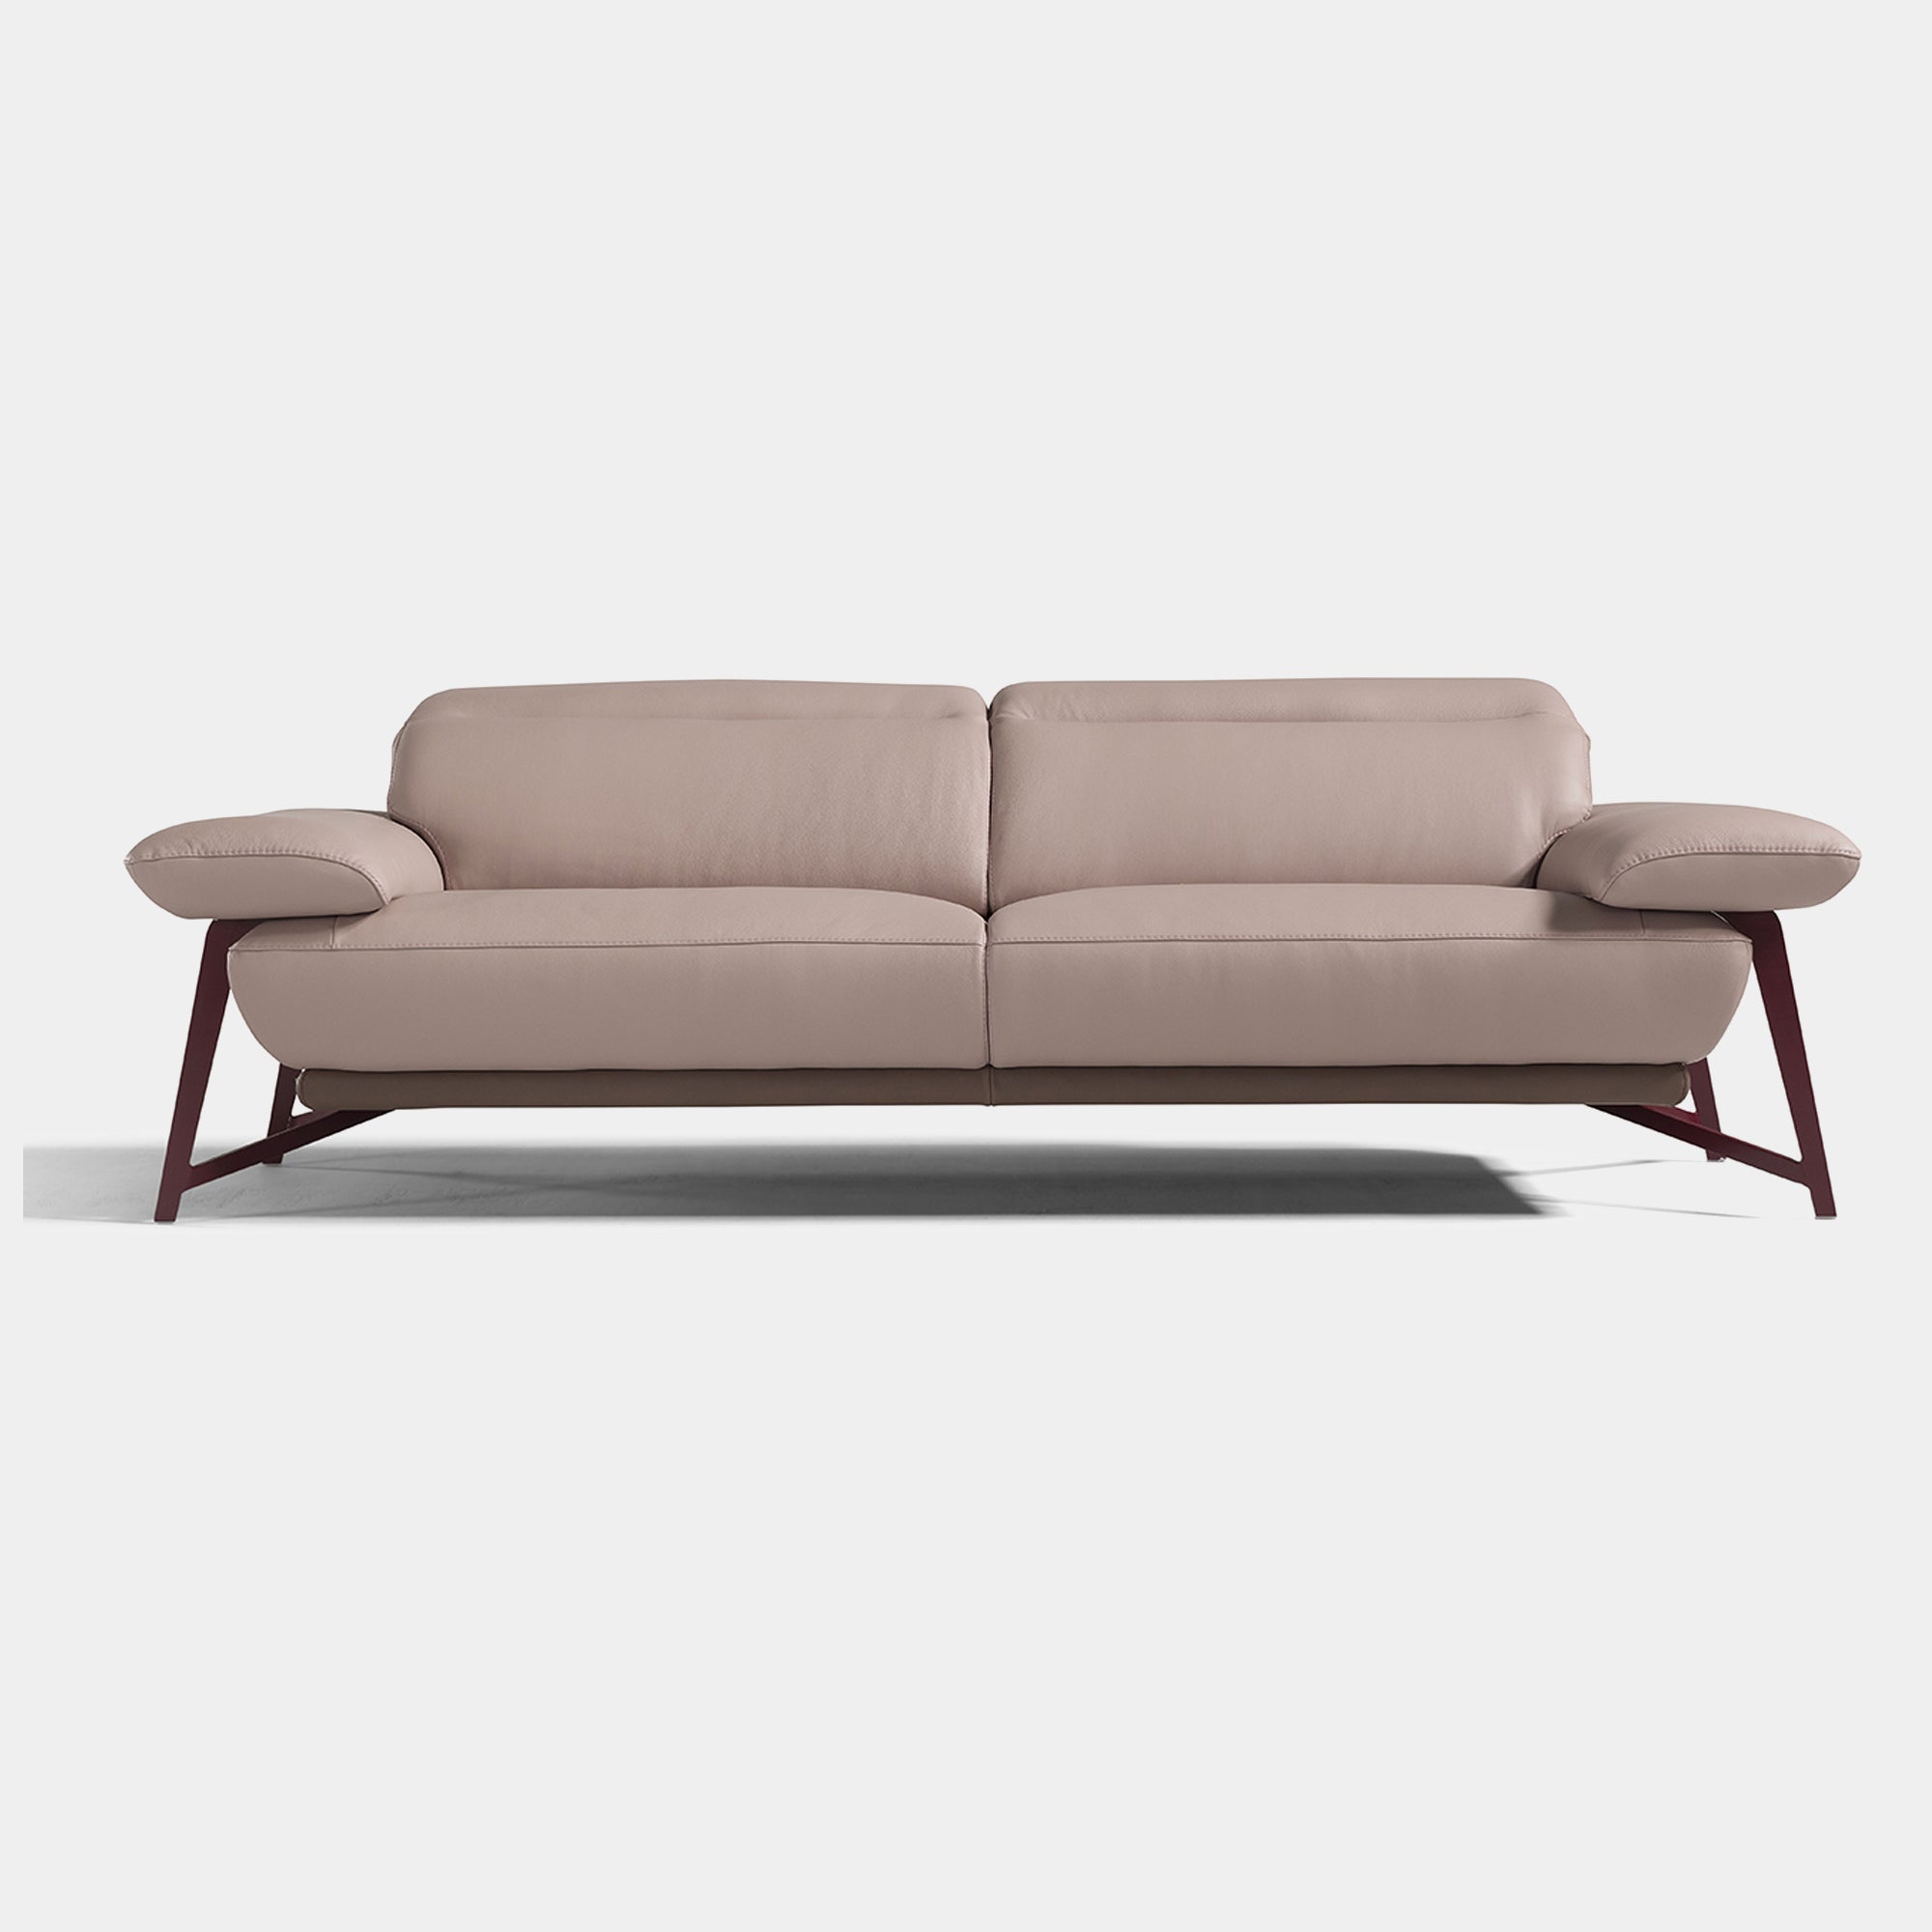 Ancona - 3 Seat Sofa In Fabric Or Leather Leather Cat B